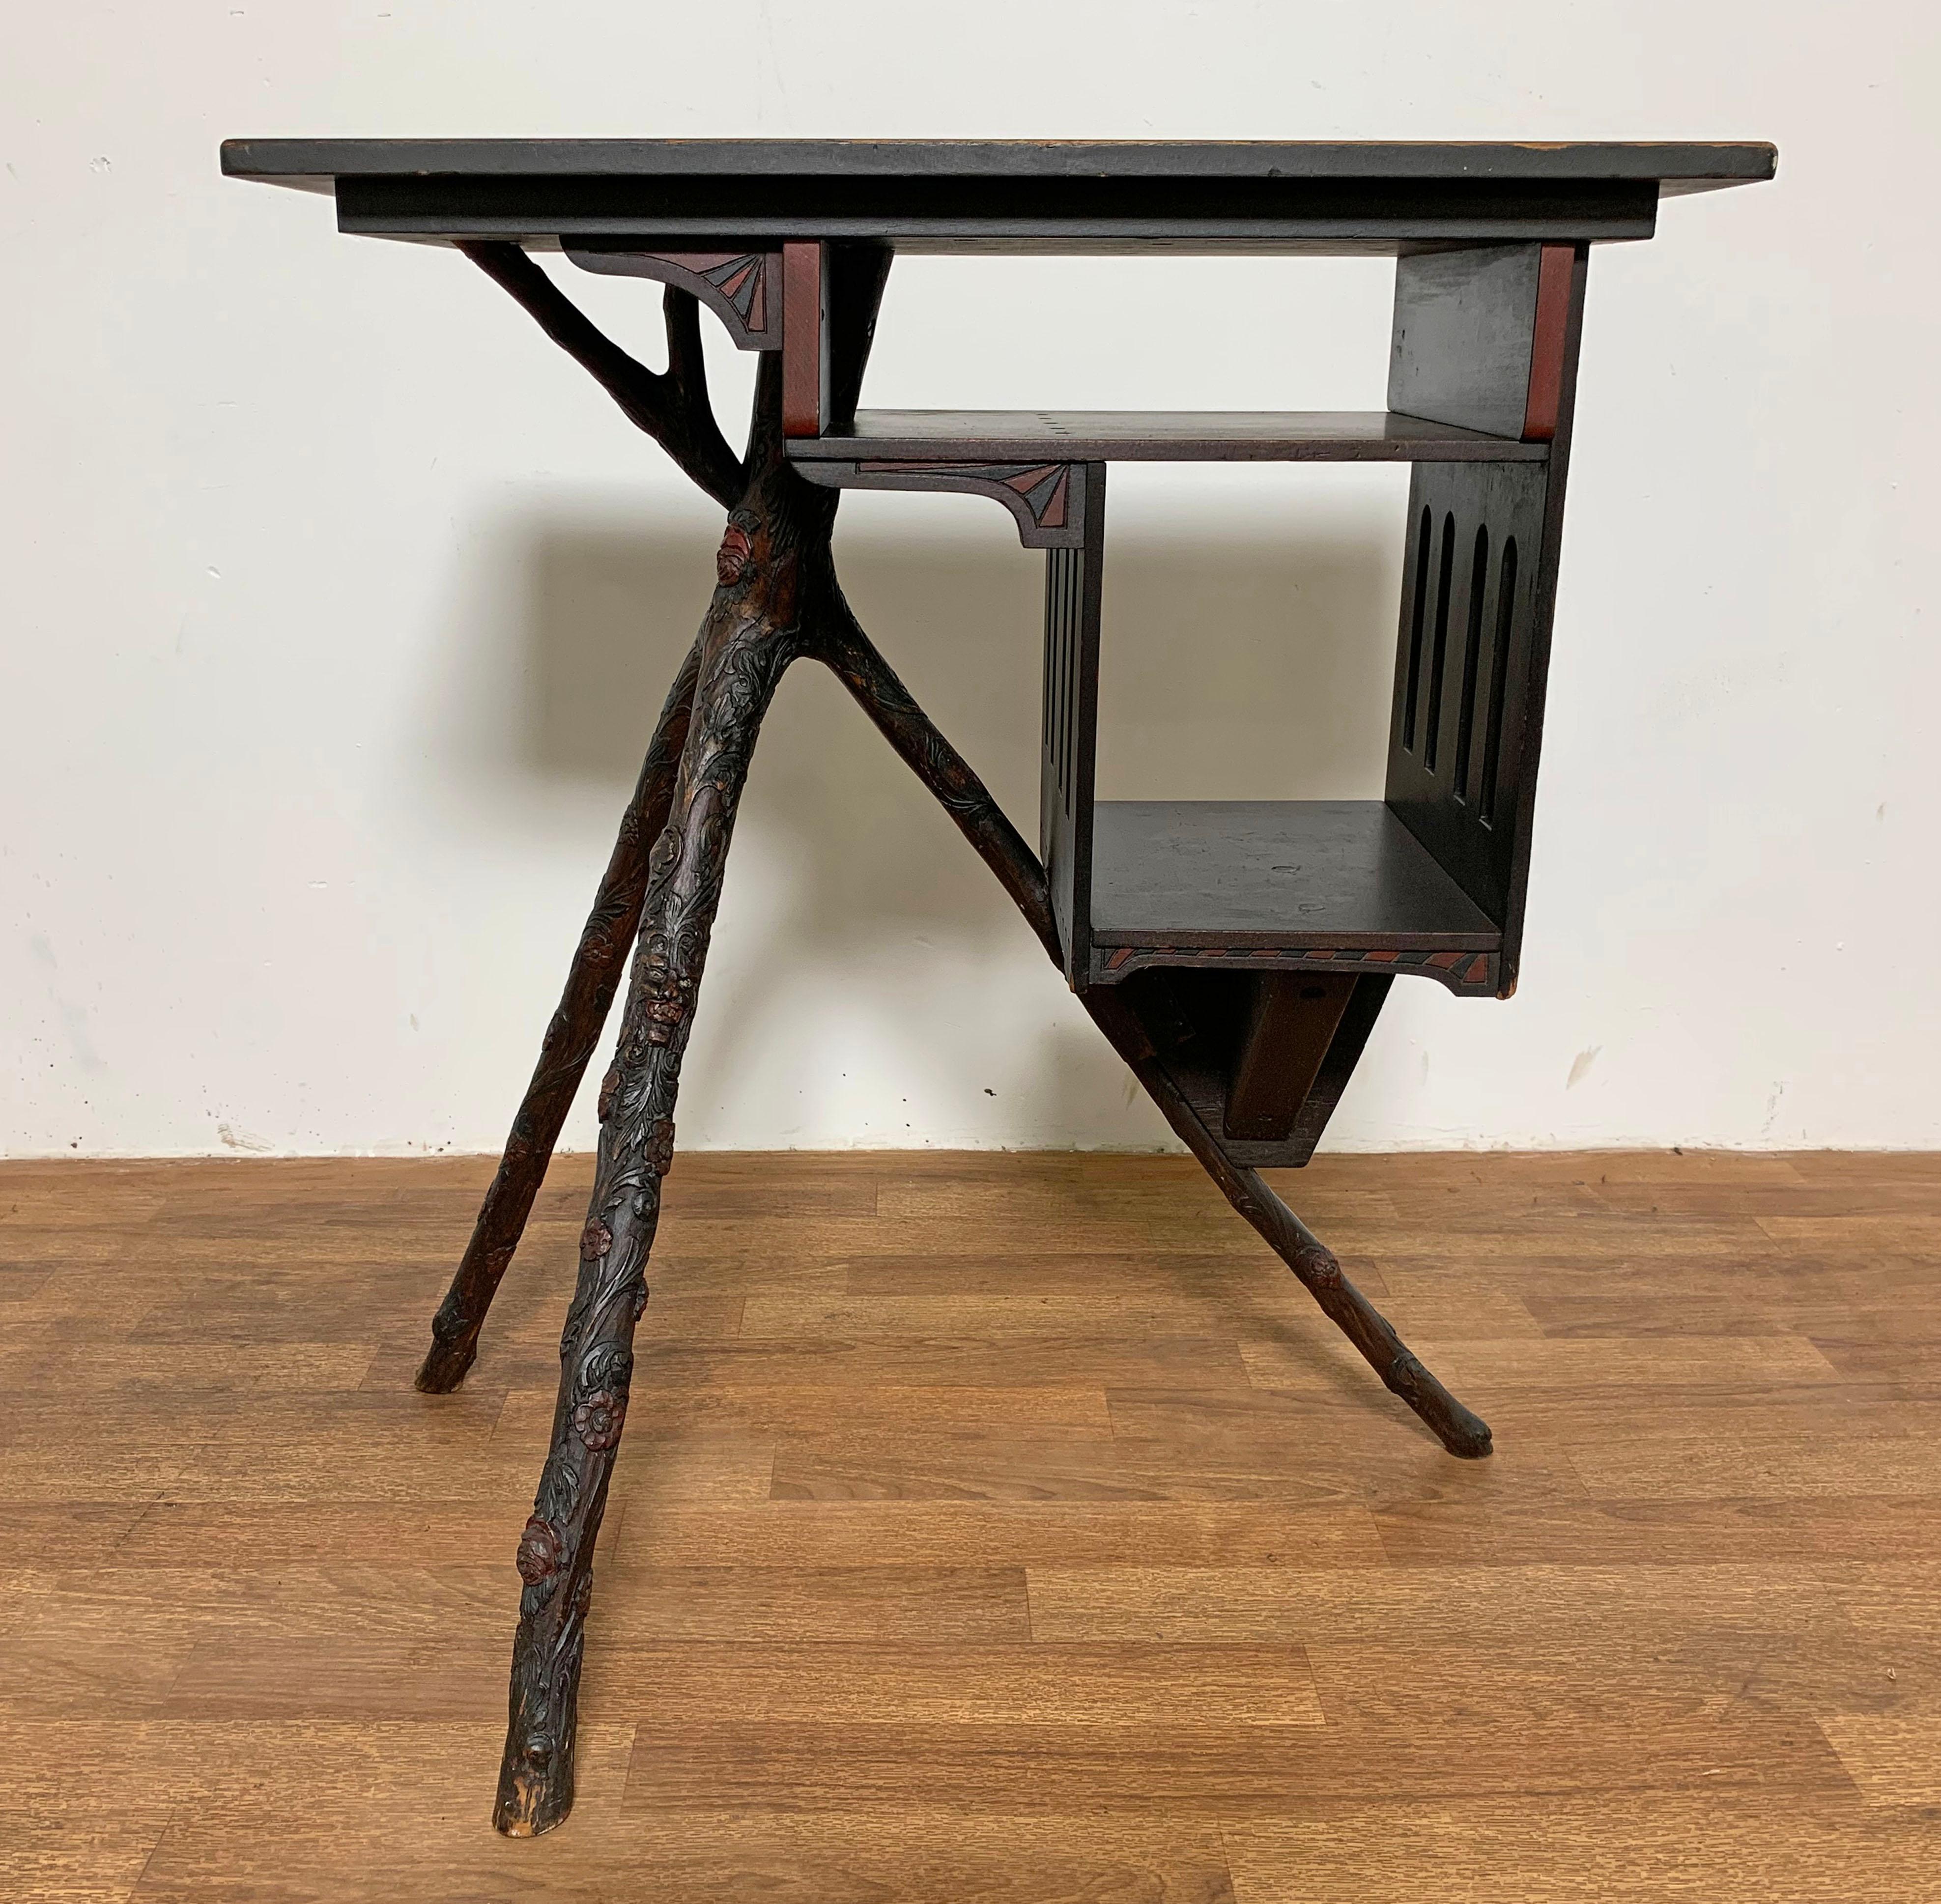 An exceptional piece of rustic Adirondack furniture from a Lake Sunapee, NH camp circa 1870-1890. This stand features handcrafted birch casing decorated with late Victorian geometric motifs. The tripod legs are crafted almost entirely from a single